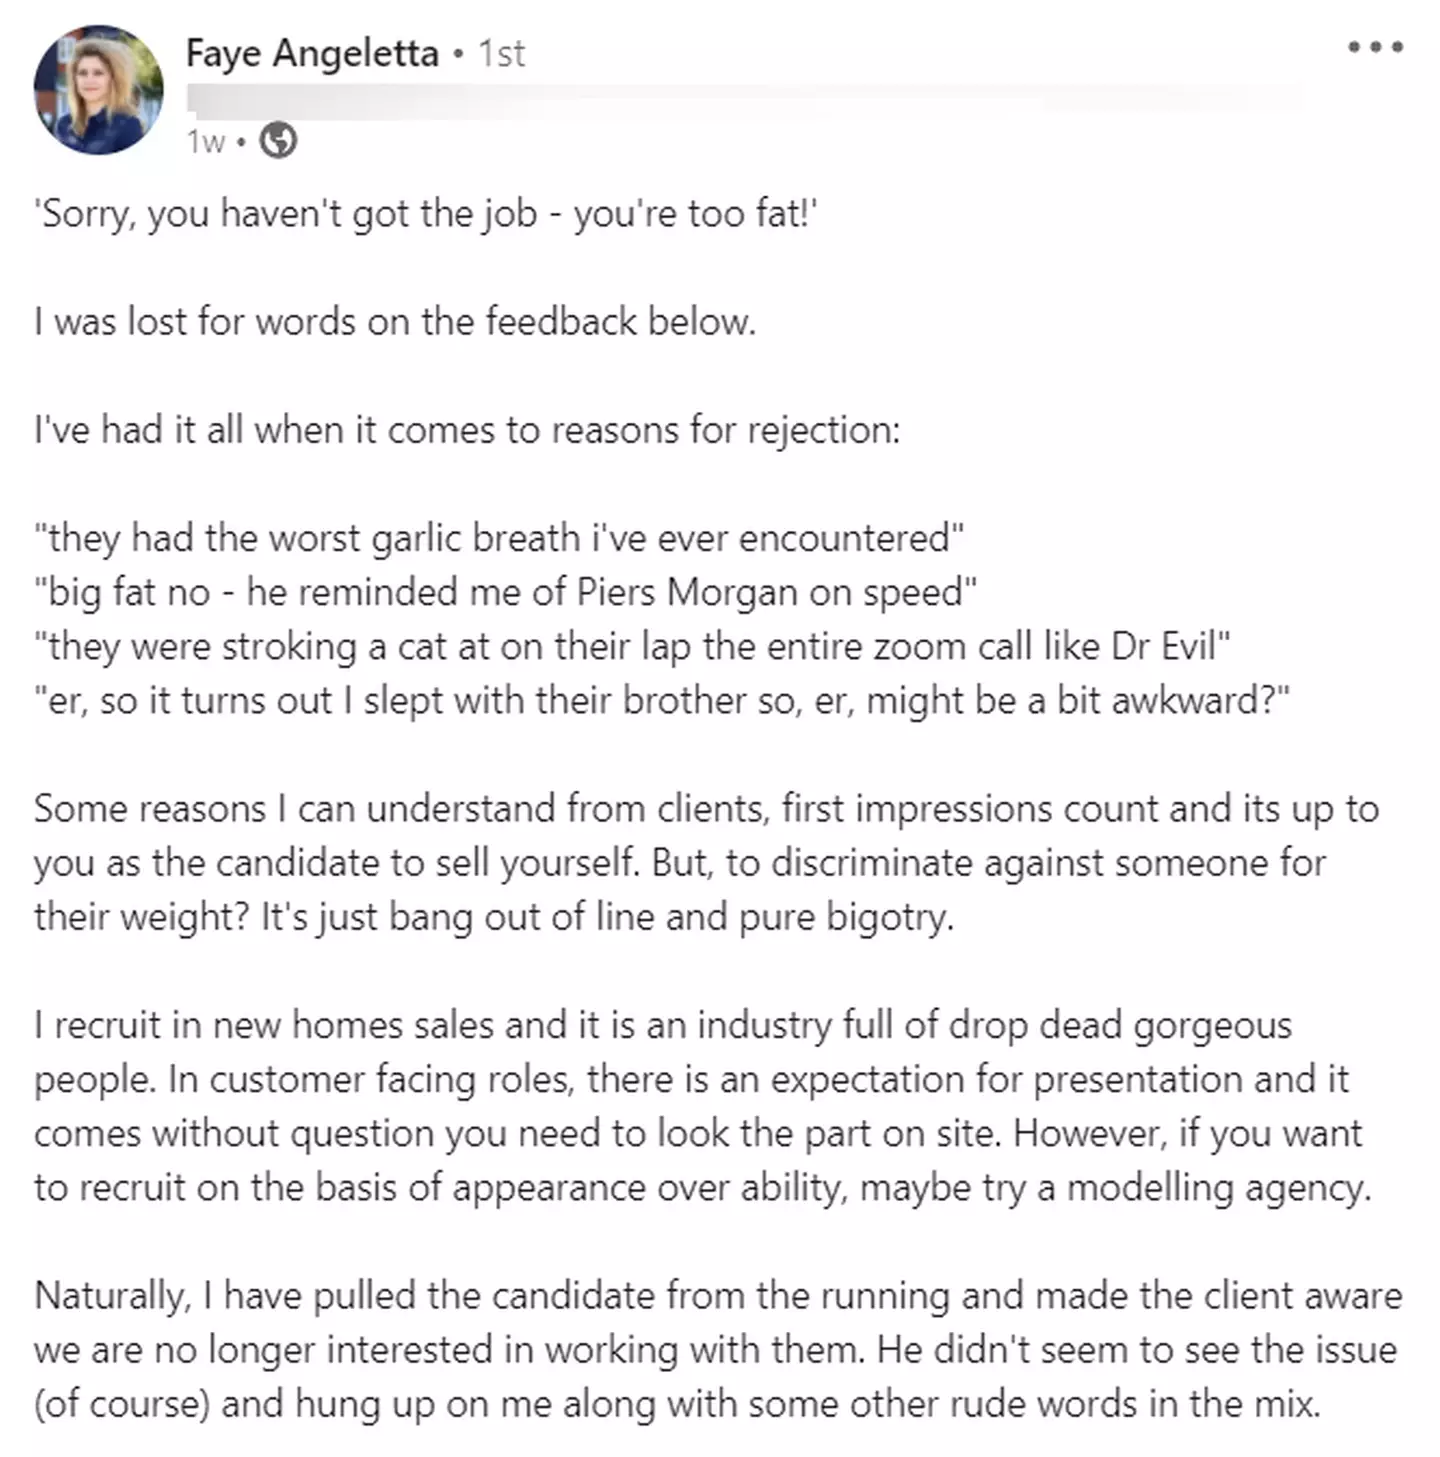 Faye posted about her exchange with her boss on LinkedIn (